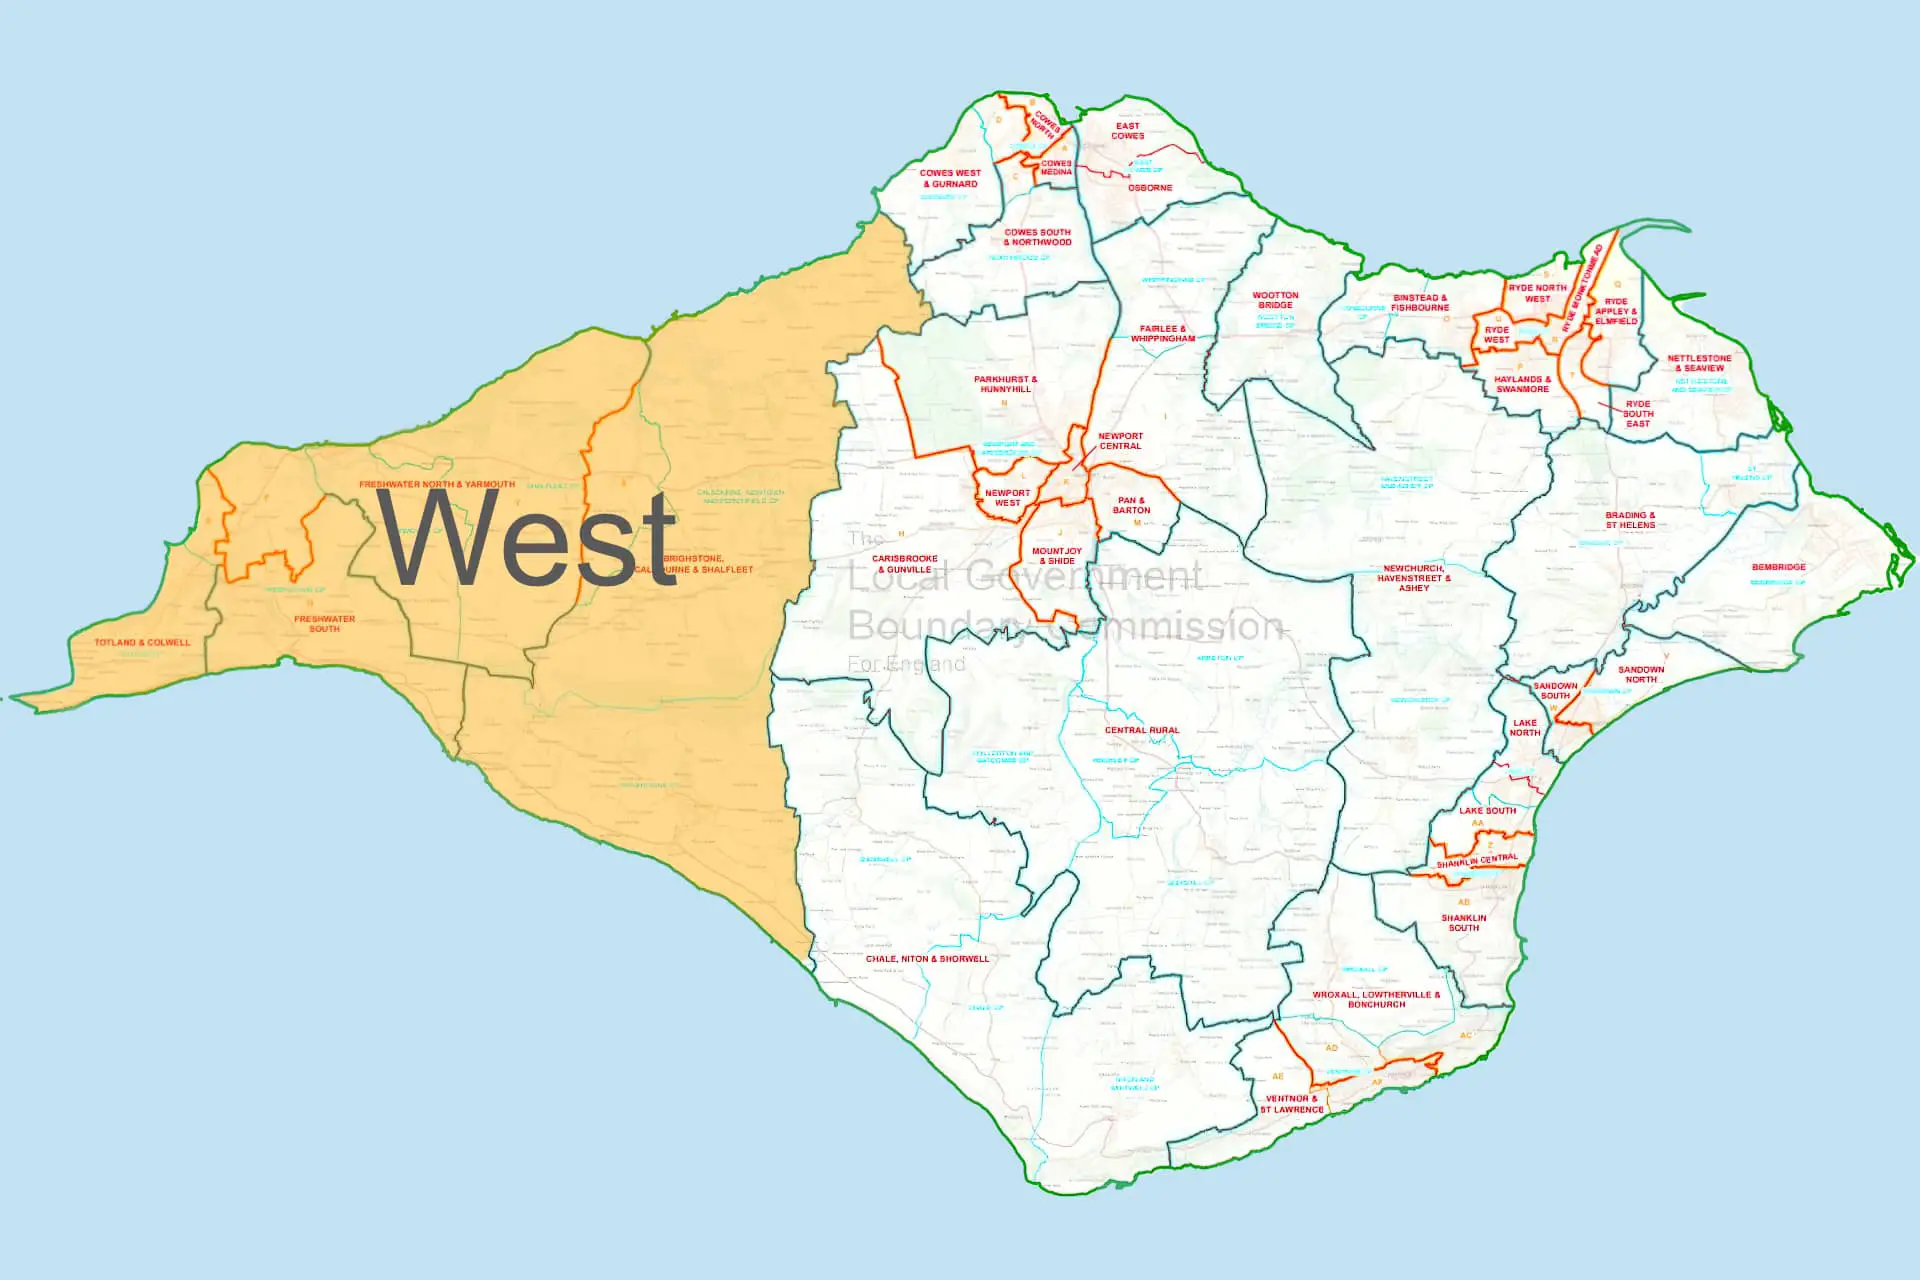 Isle of Wight - Boundary map - West (comp)